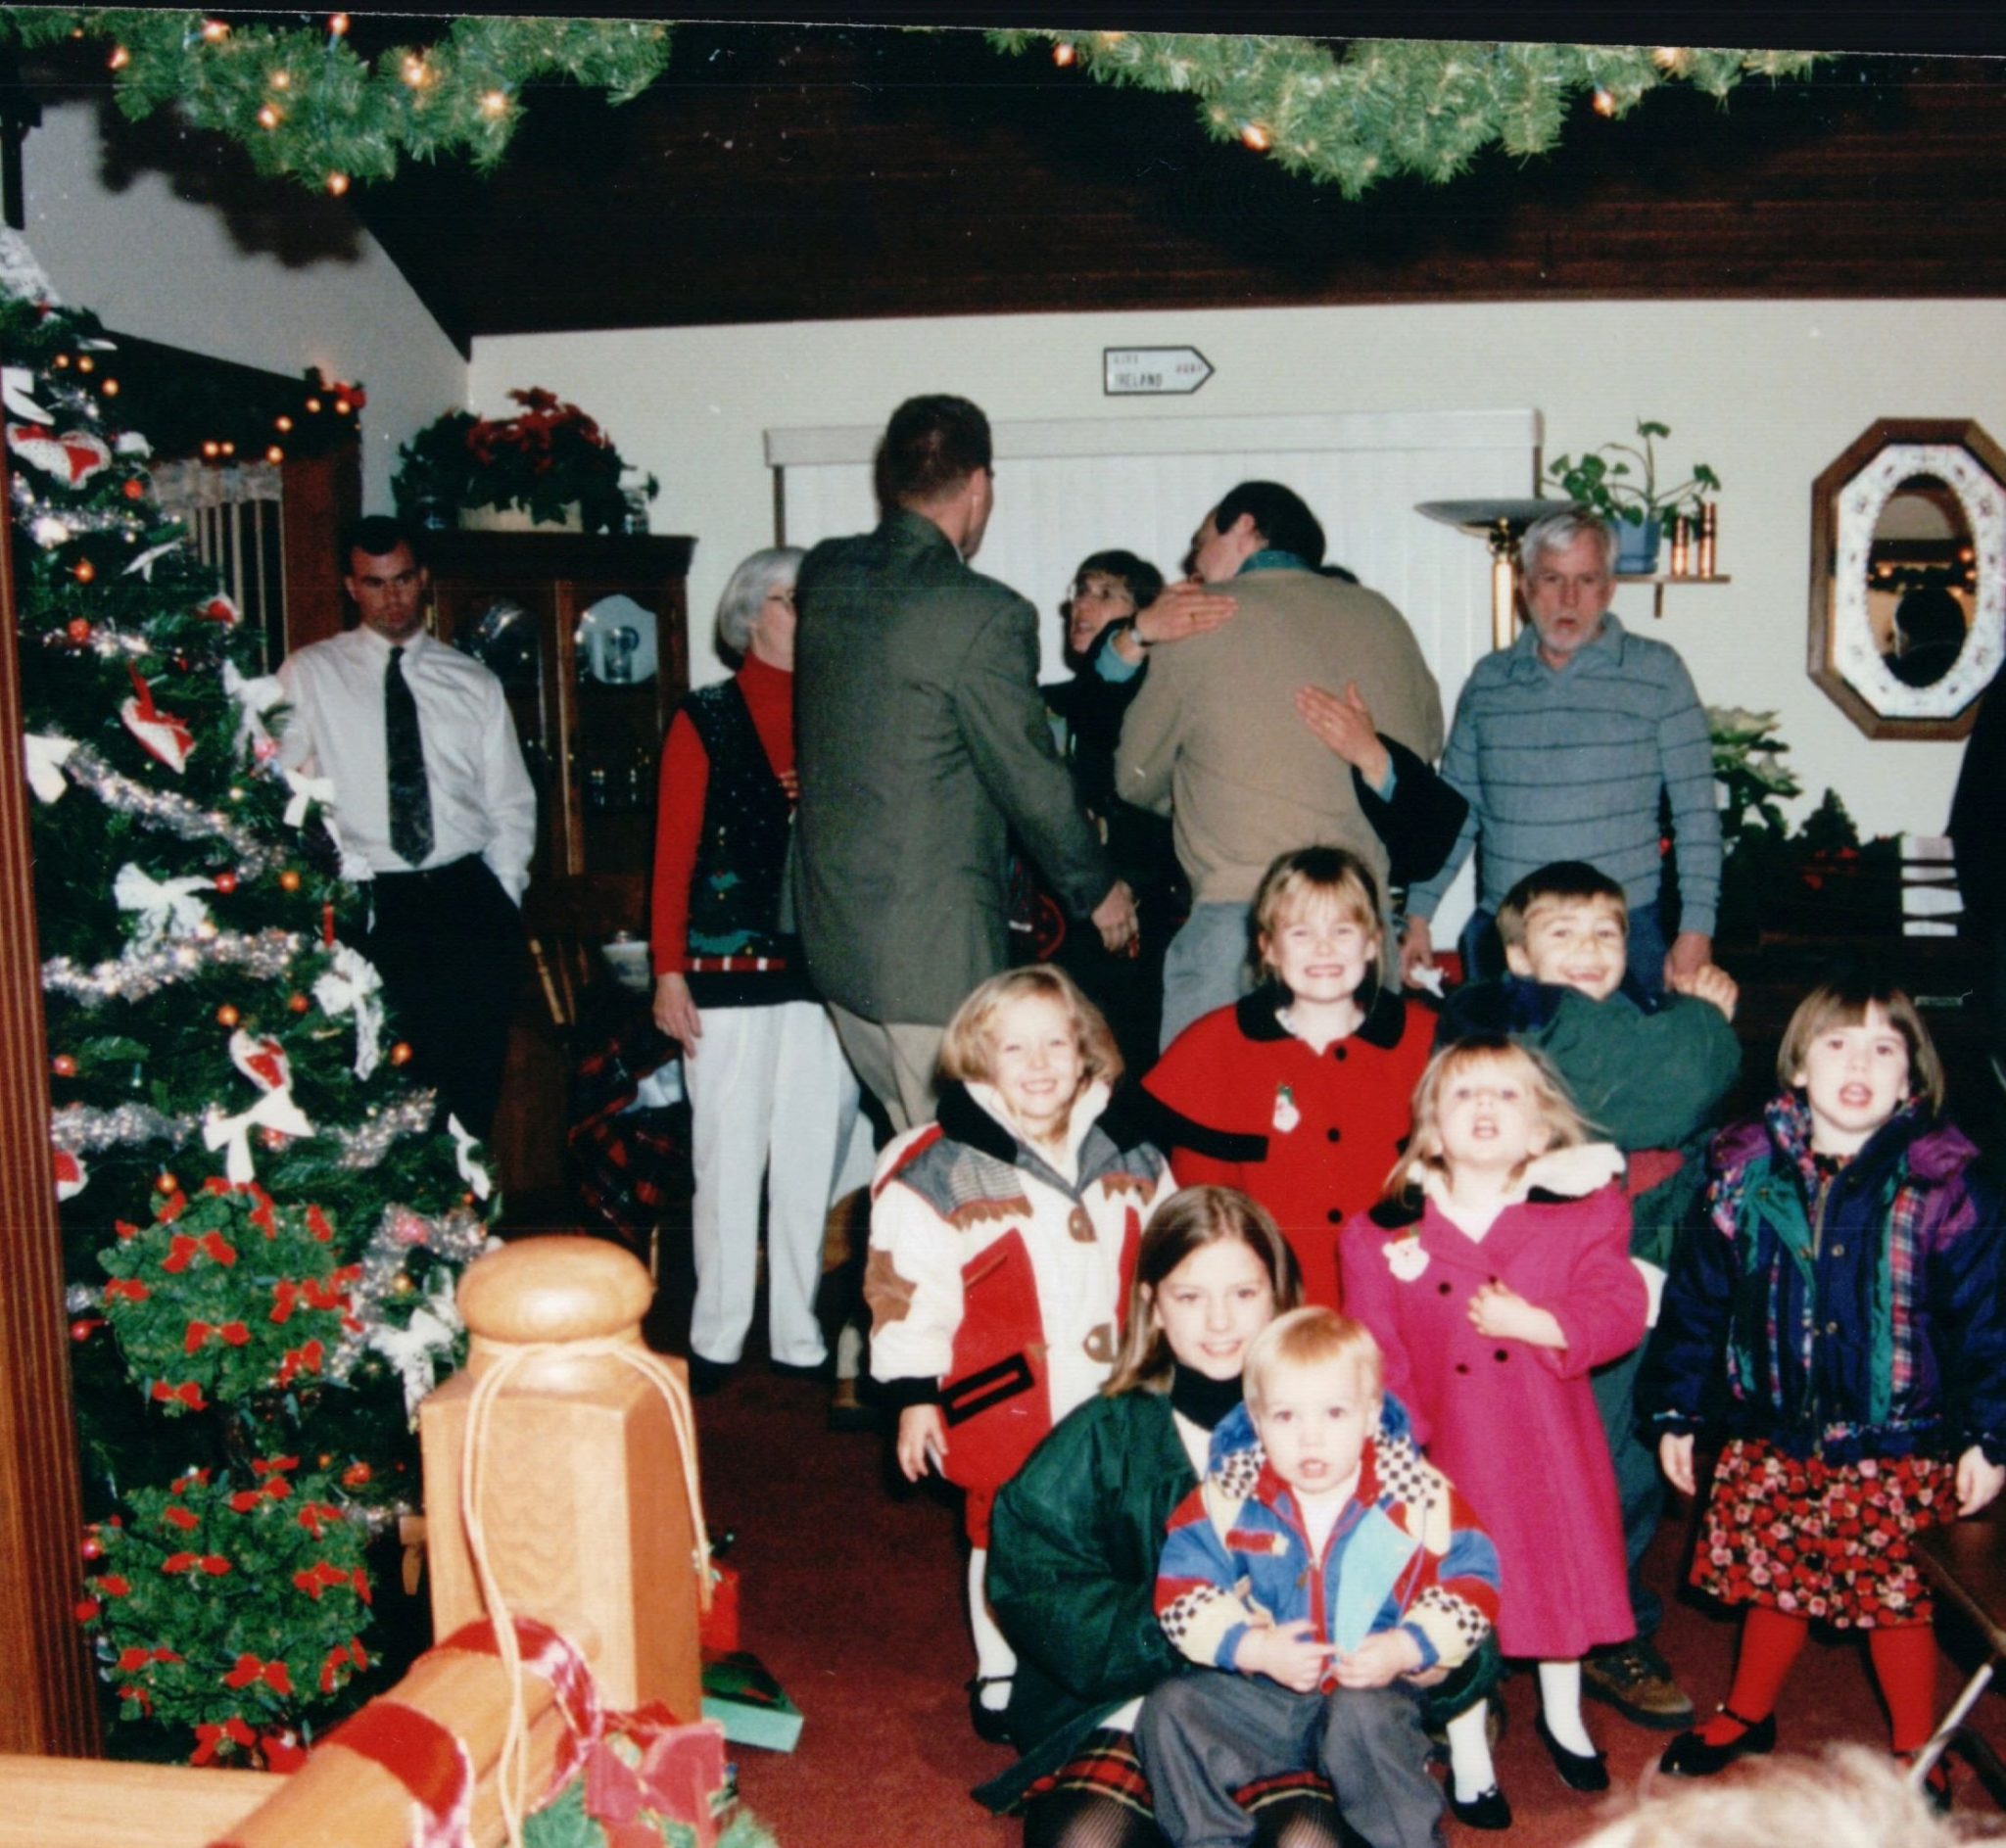 Photo of the Daily family Christmas. To the left a Christmas tree decorated in tinsel with adults embracing in the background. In the foreground 7 kids pose for the picture and to the right Bill Daily, in a blue shirt, walks toward the camera.